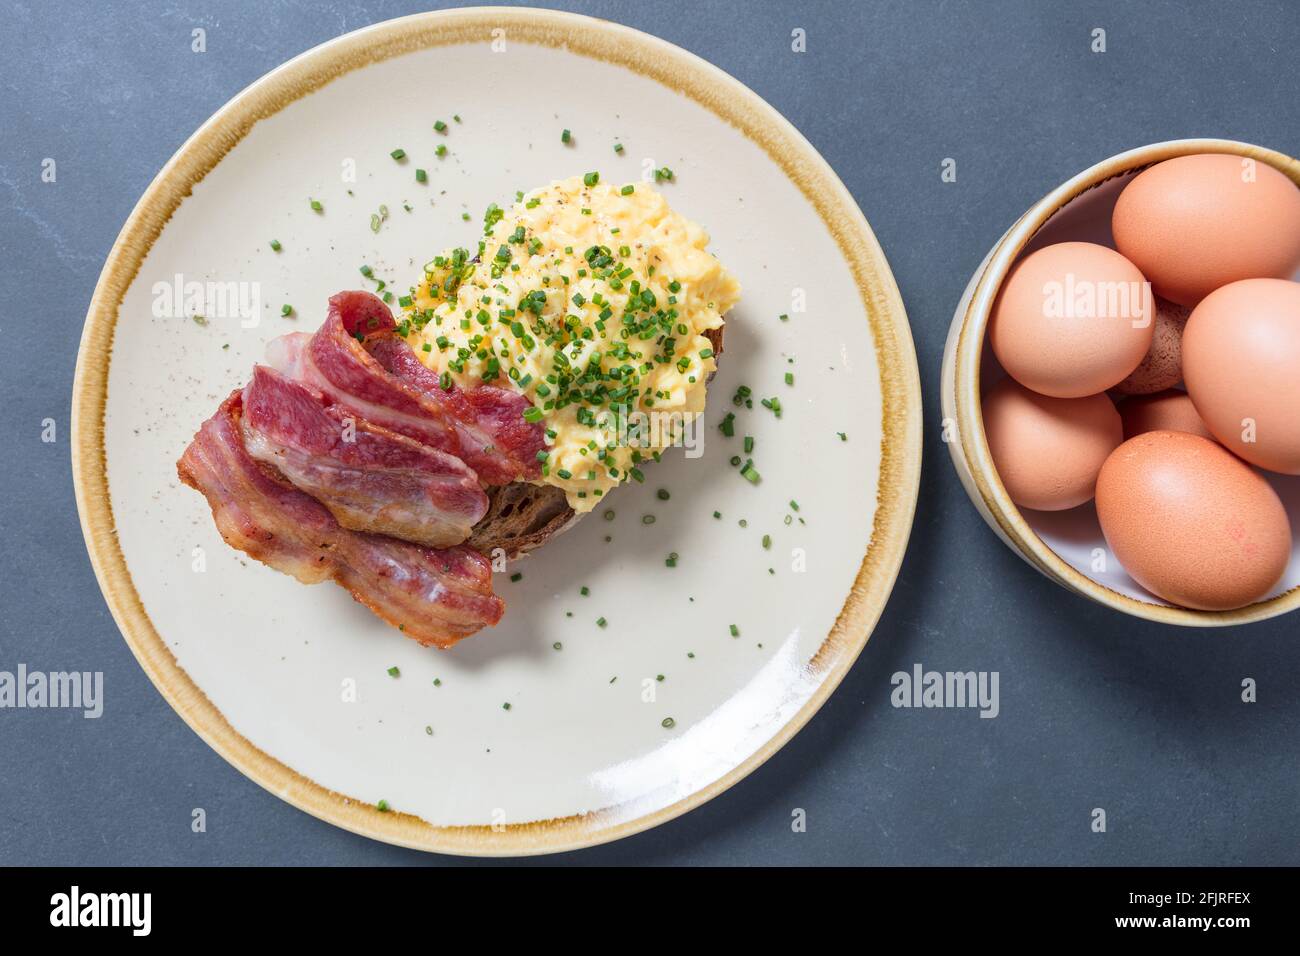 Scrambled eggs with bacon and chives on sourdough toast on plate with bowl of eggs to one side. Top down shot. Stock Photo